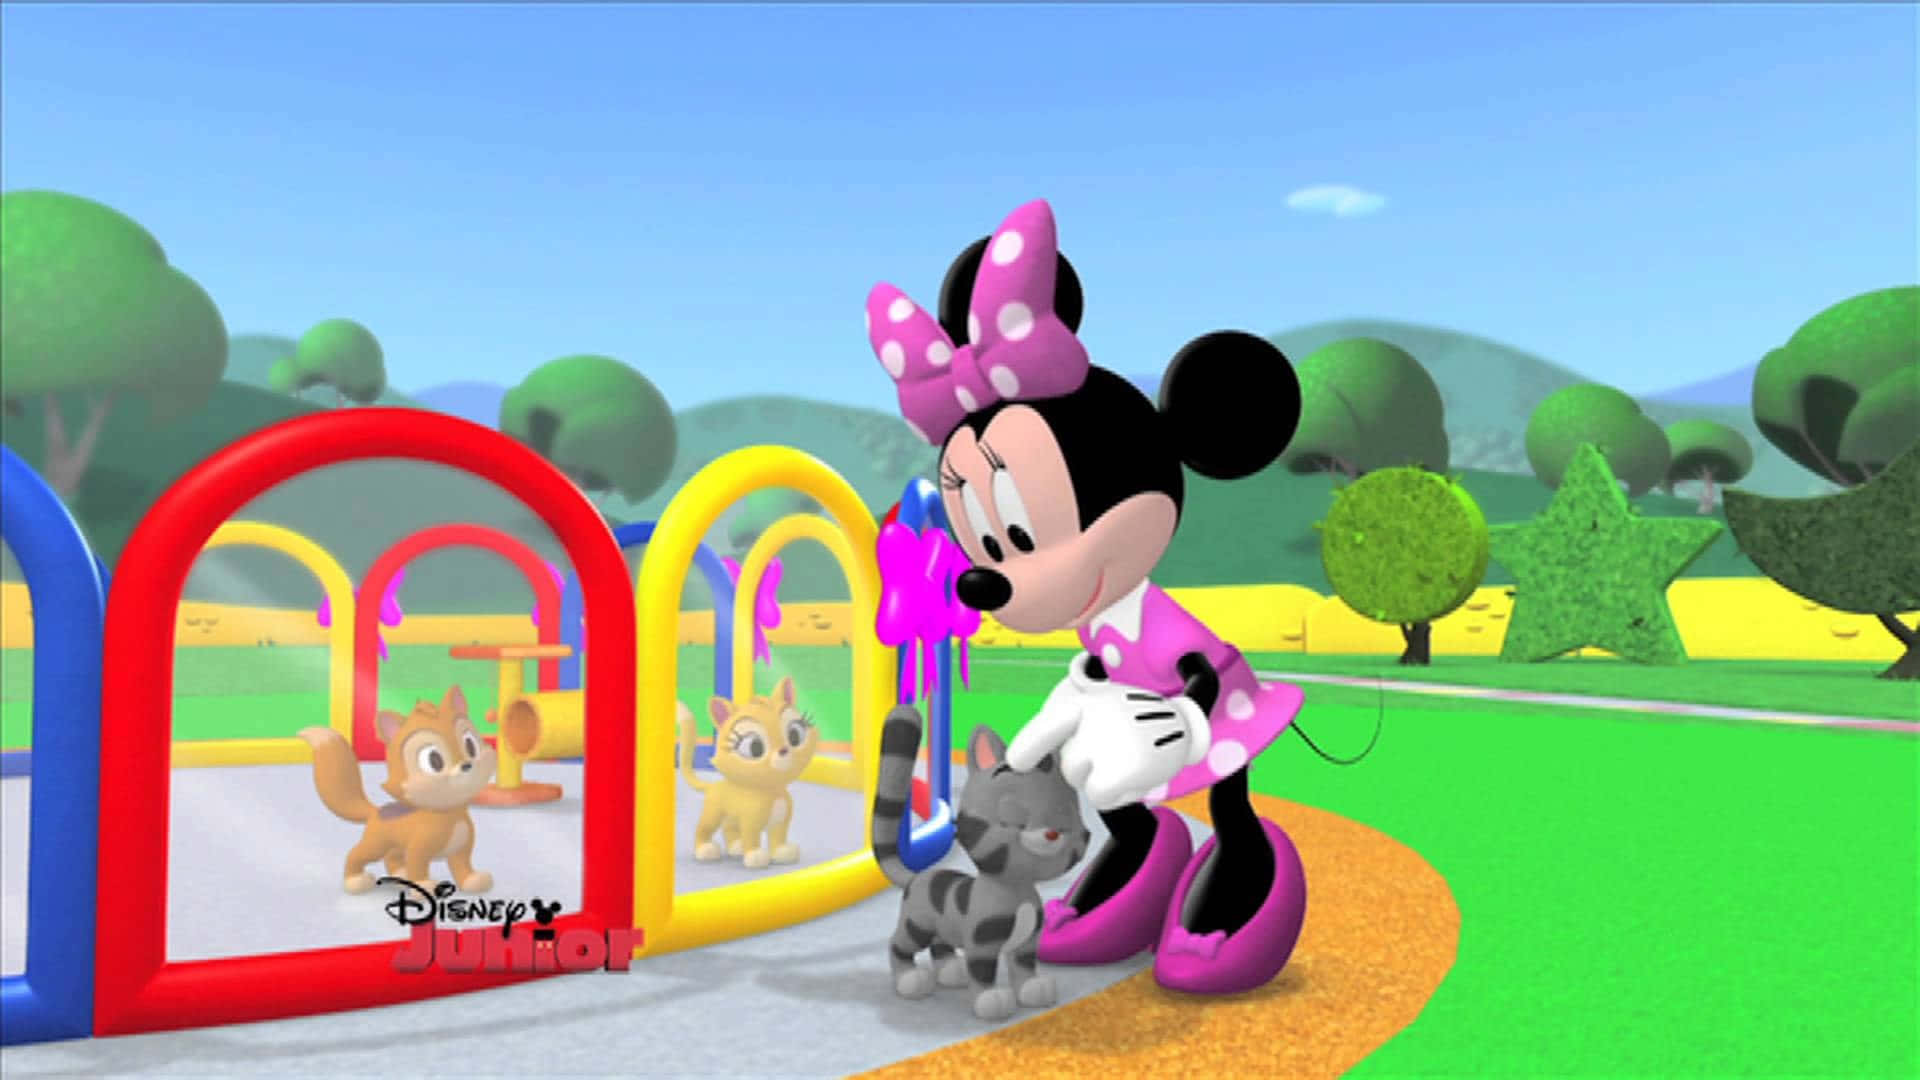 Celebrate your inner child with Mickey Mouse and his Clubhouse crew!